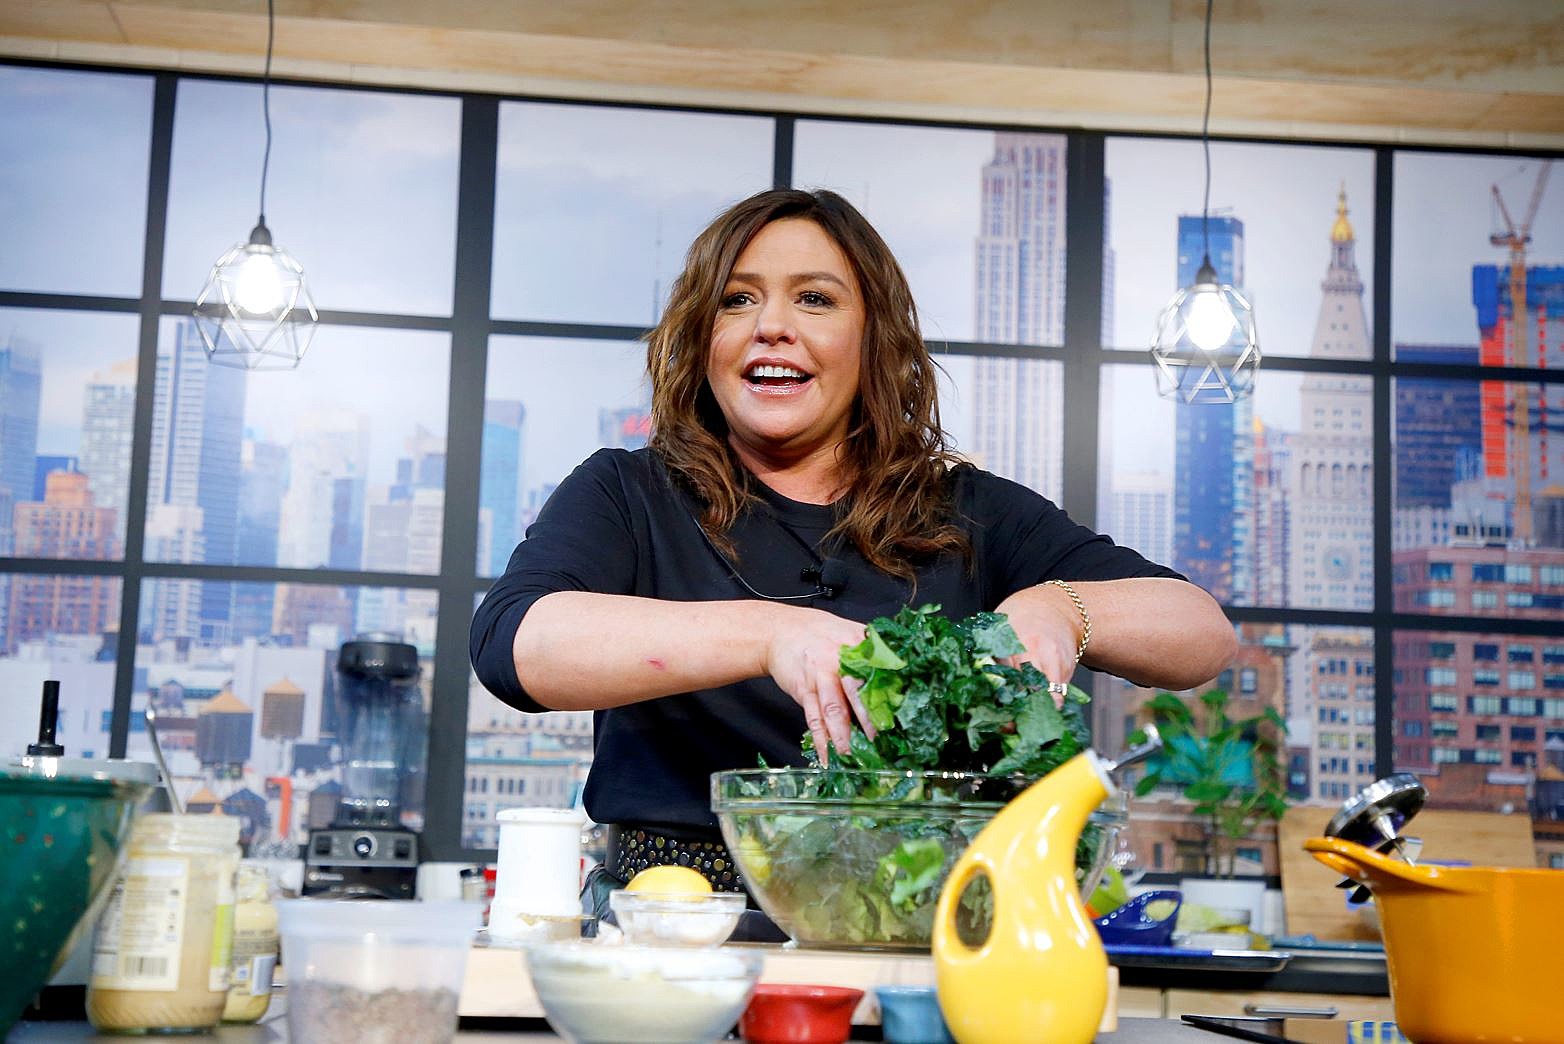 Rachael Ray's Filipino Cooking Disappoints Uncle Roger and His